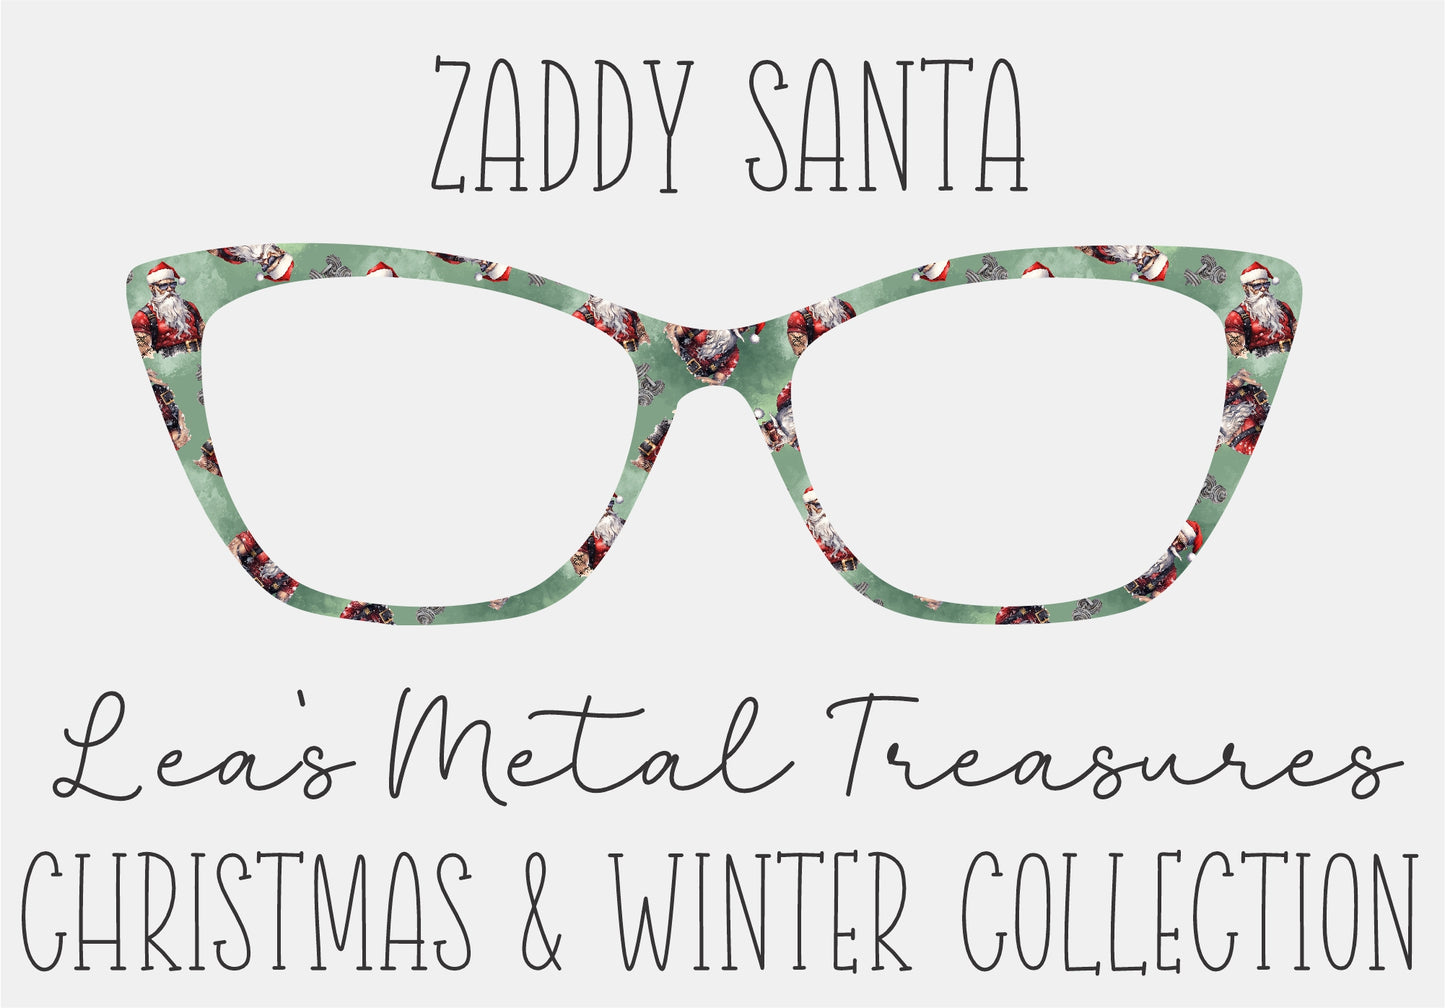 ZADDY SANTA Eyewear Frame Toppers COMES WITH MAGNETS